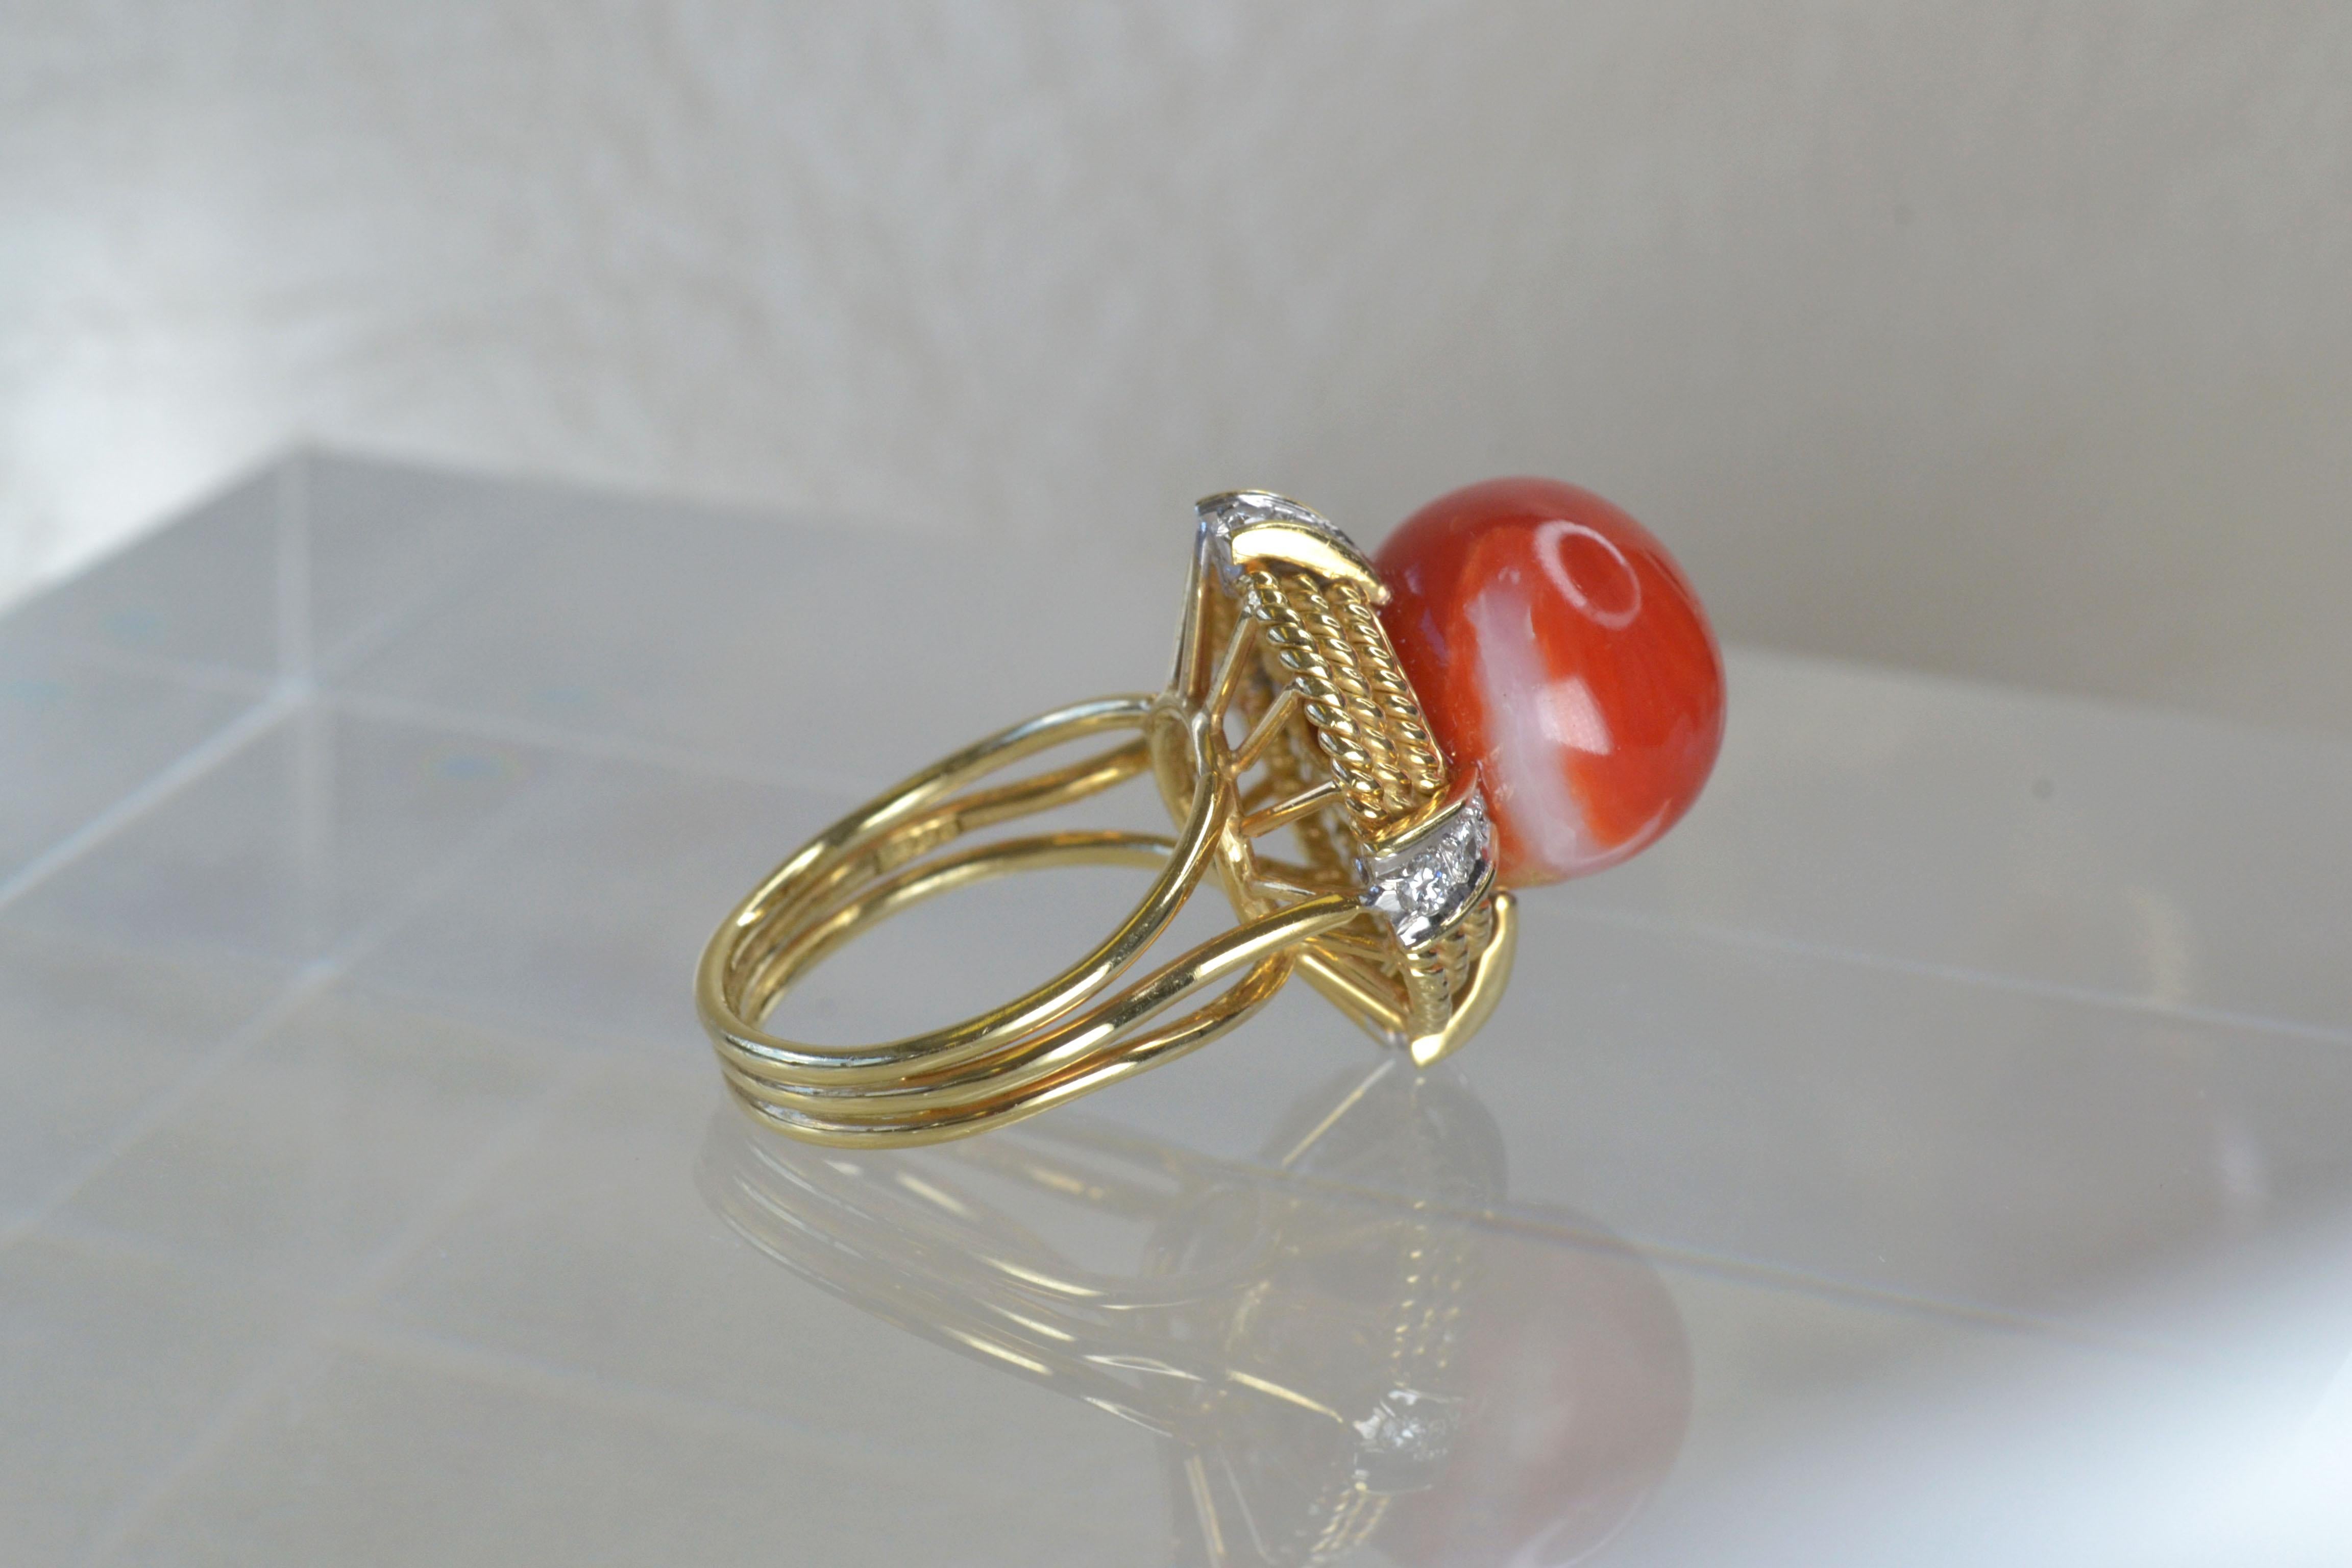 Retro Vintage 14k Gold Coral Sphere Ring with White Diamonds, One-of-a-kind For Sale